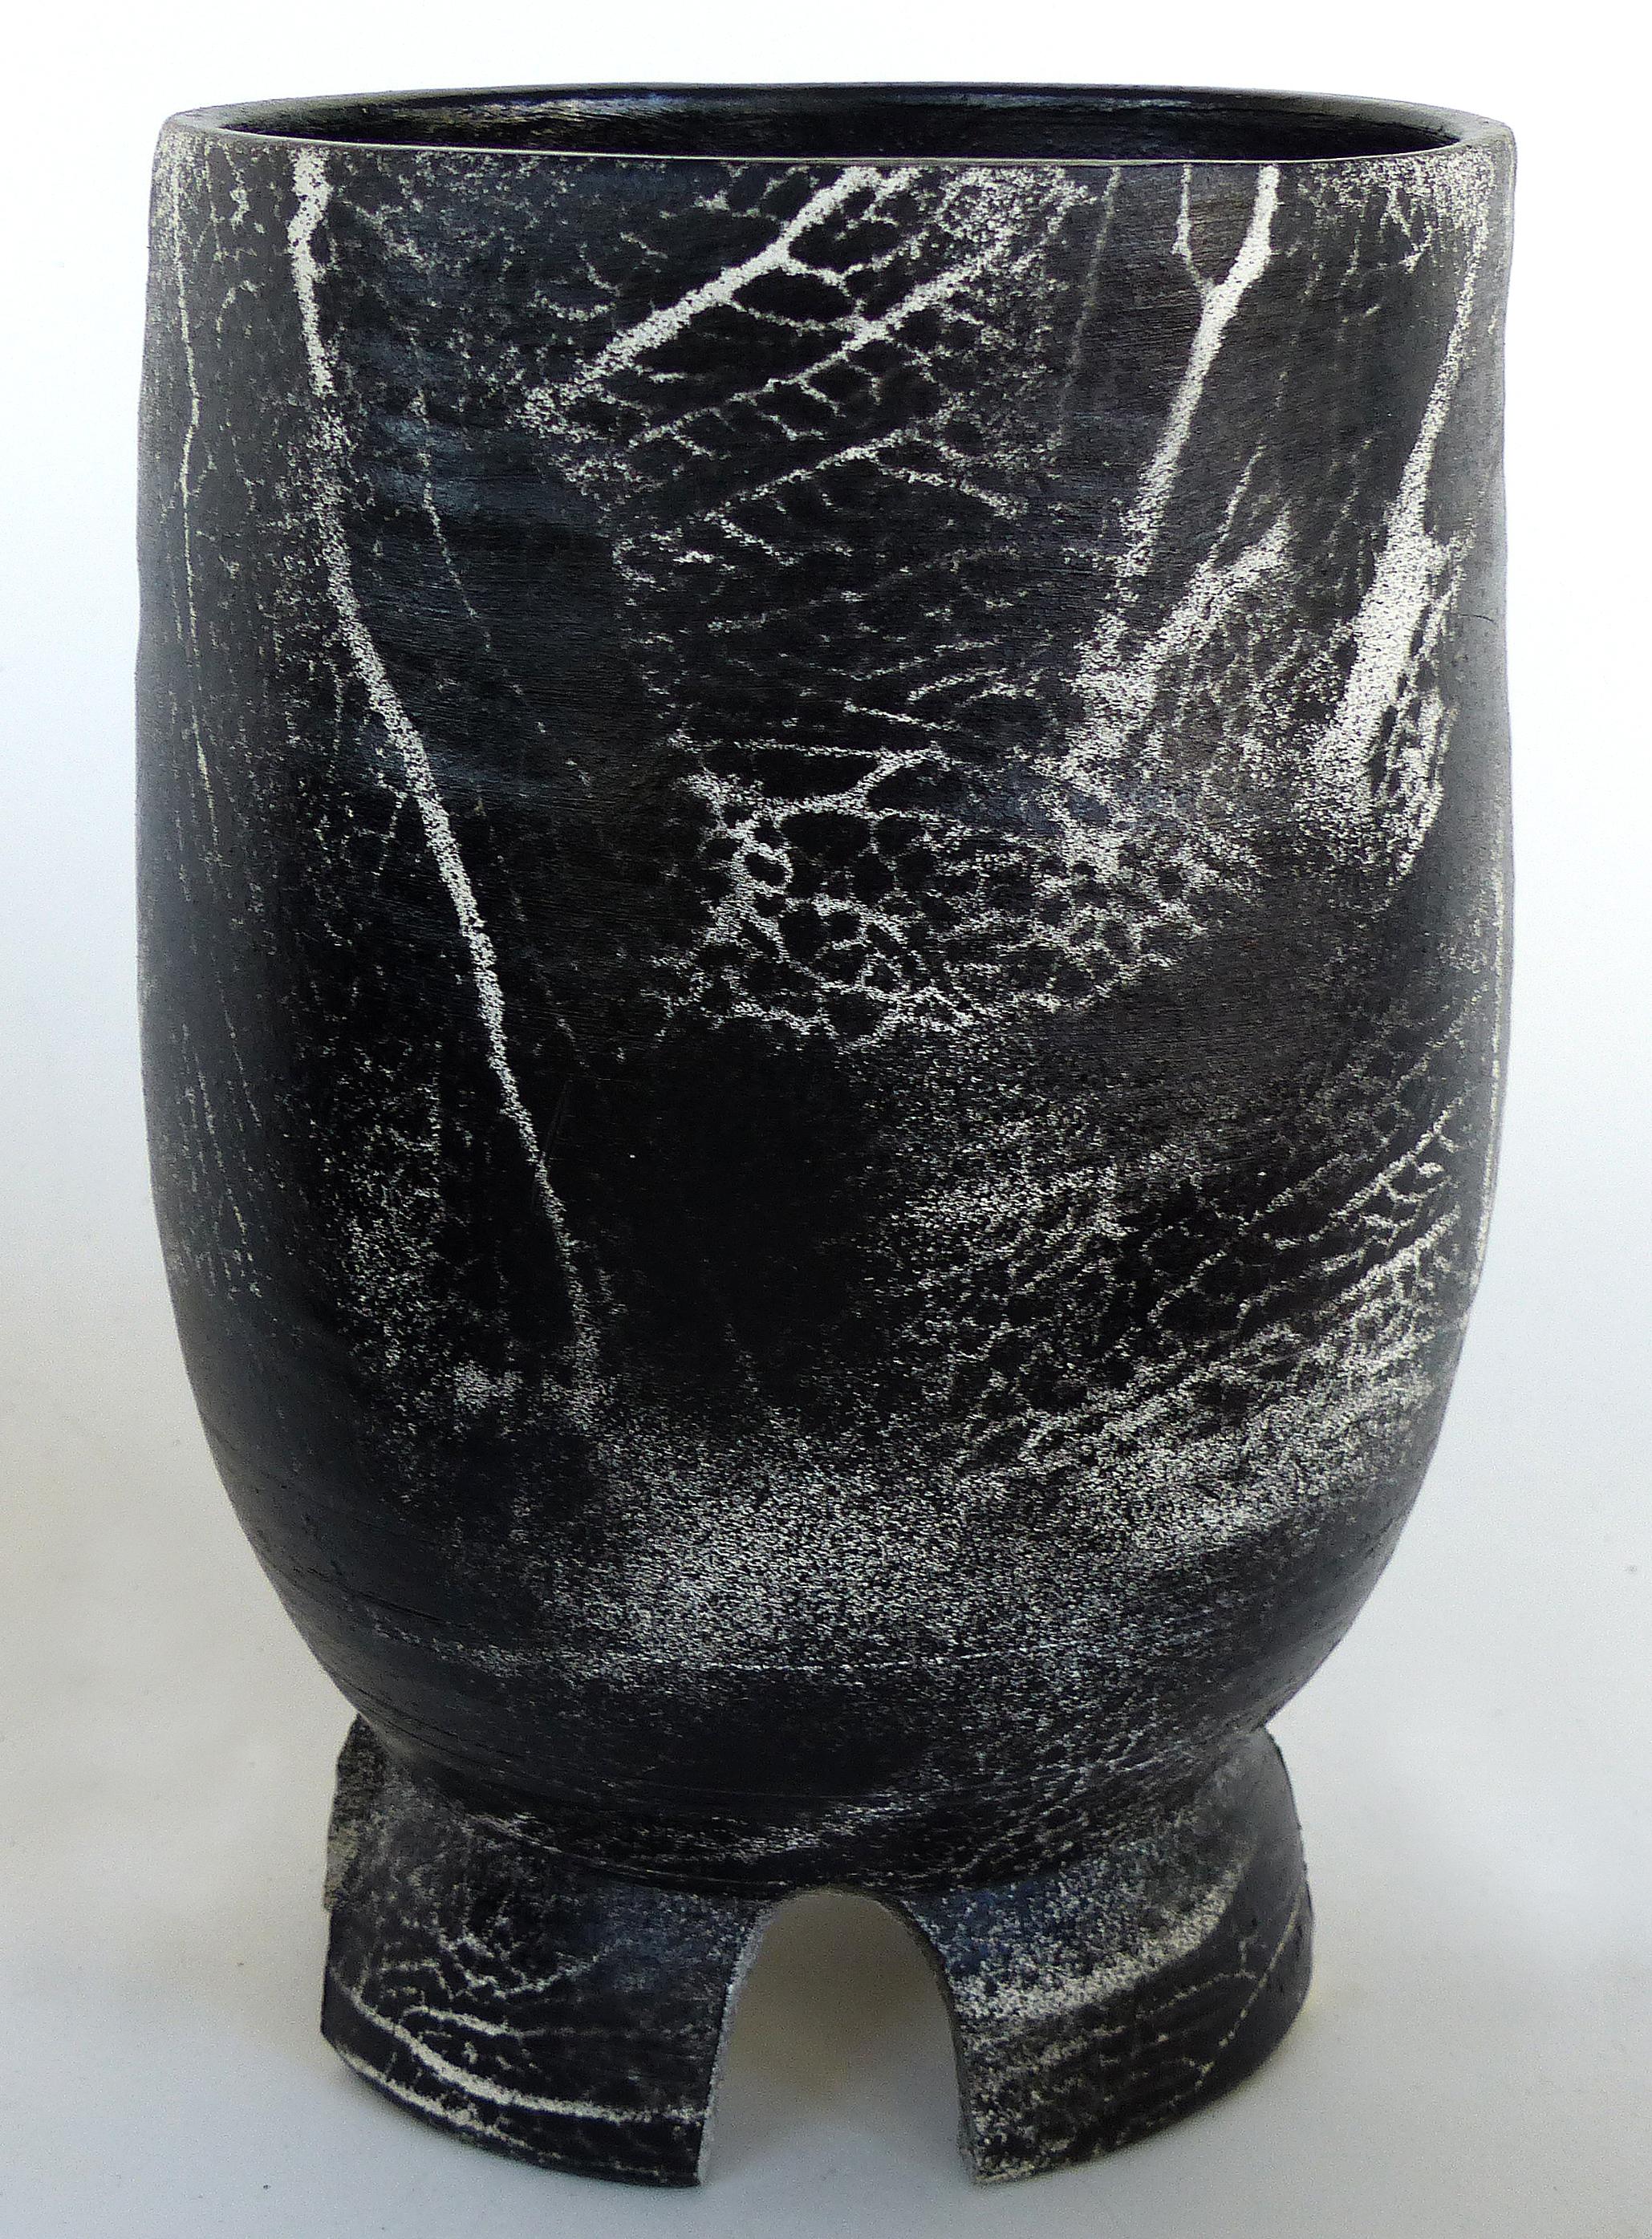 Three Hand Turned Ceramic Black & White Vessels by Ceramicist Gary Fonseca

Offered for sale is a set of three hand-turned ceramic vessels by the contemporary ceramist Gary Fonseca.
Tall vase form planter with drainage holes on base, 8.5